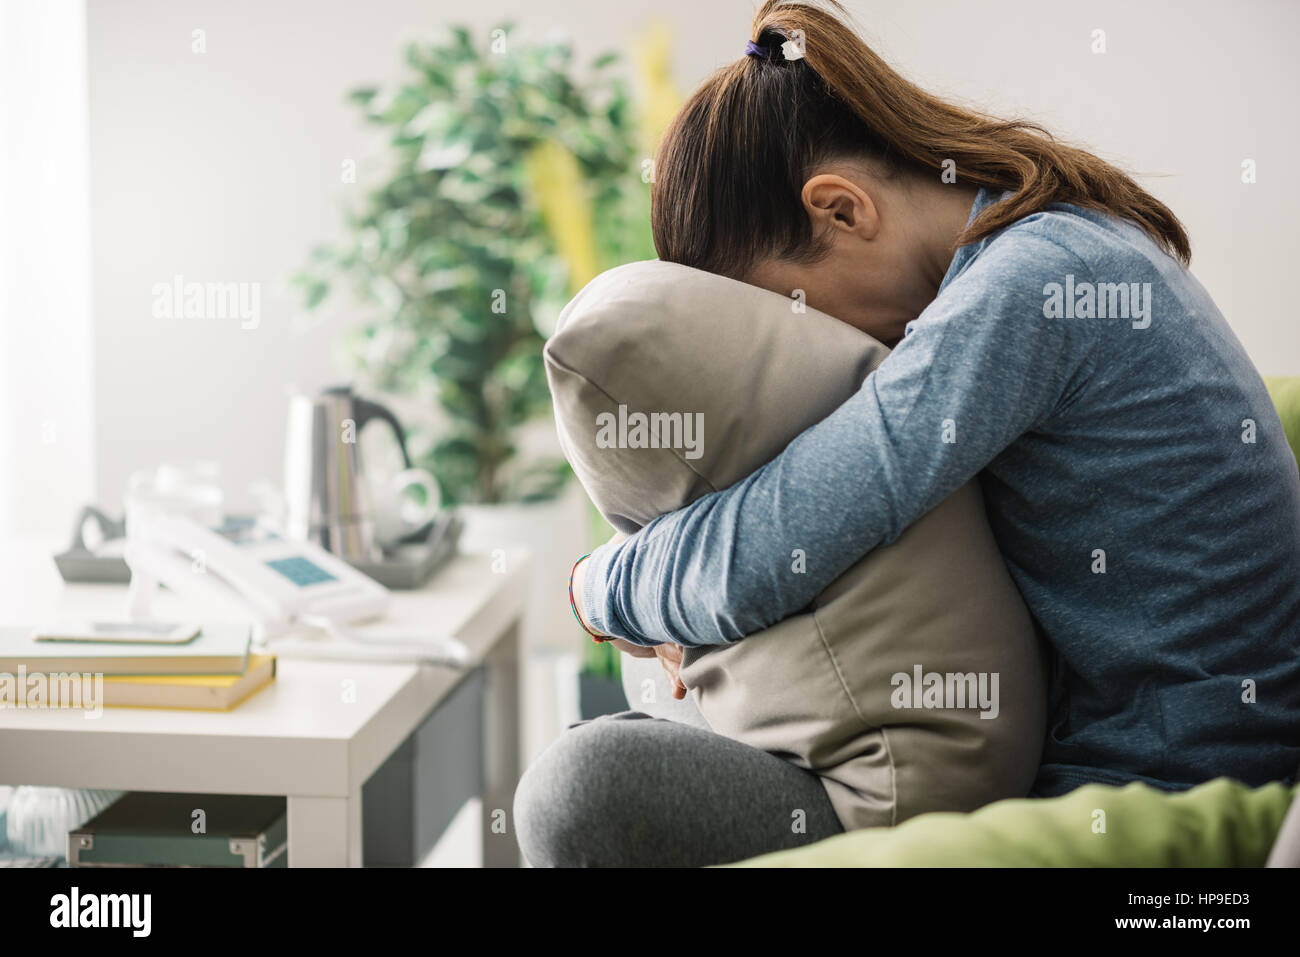 Unhappy lonely depressed woman at home, she is sitting on the couch and hiding her face on a pillow, depression concept Stock Photo